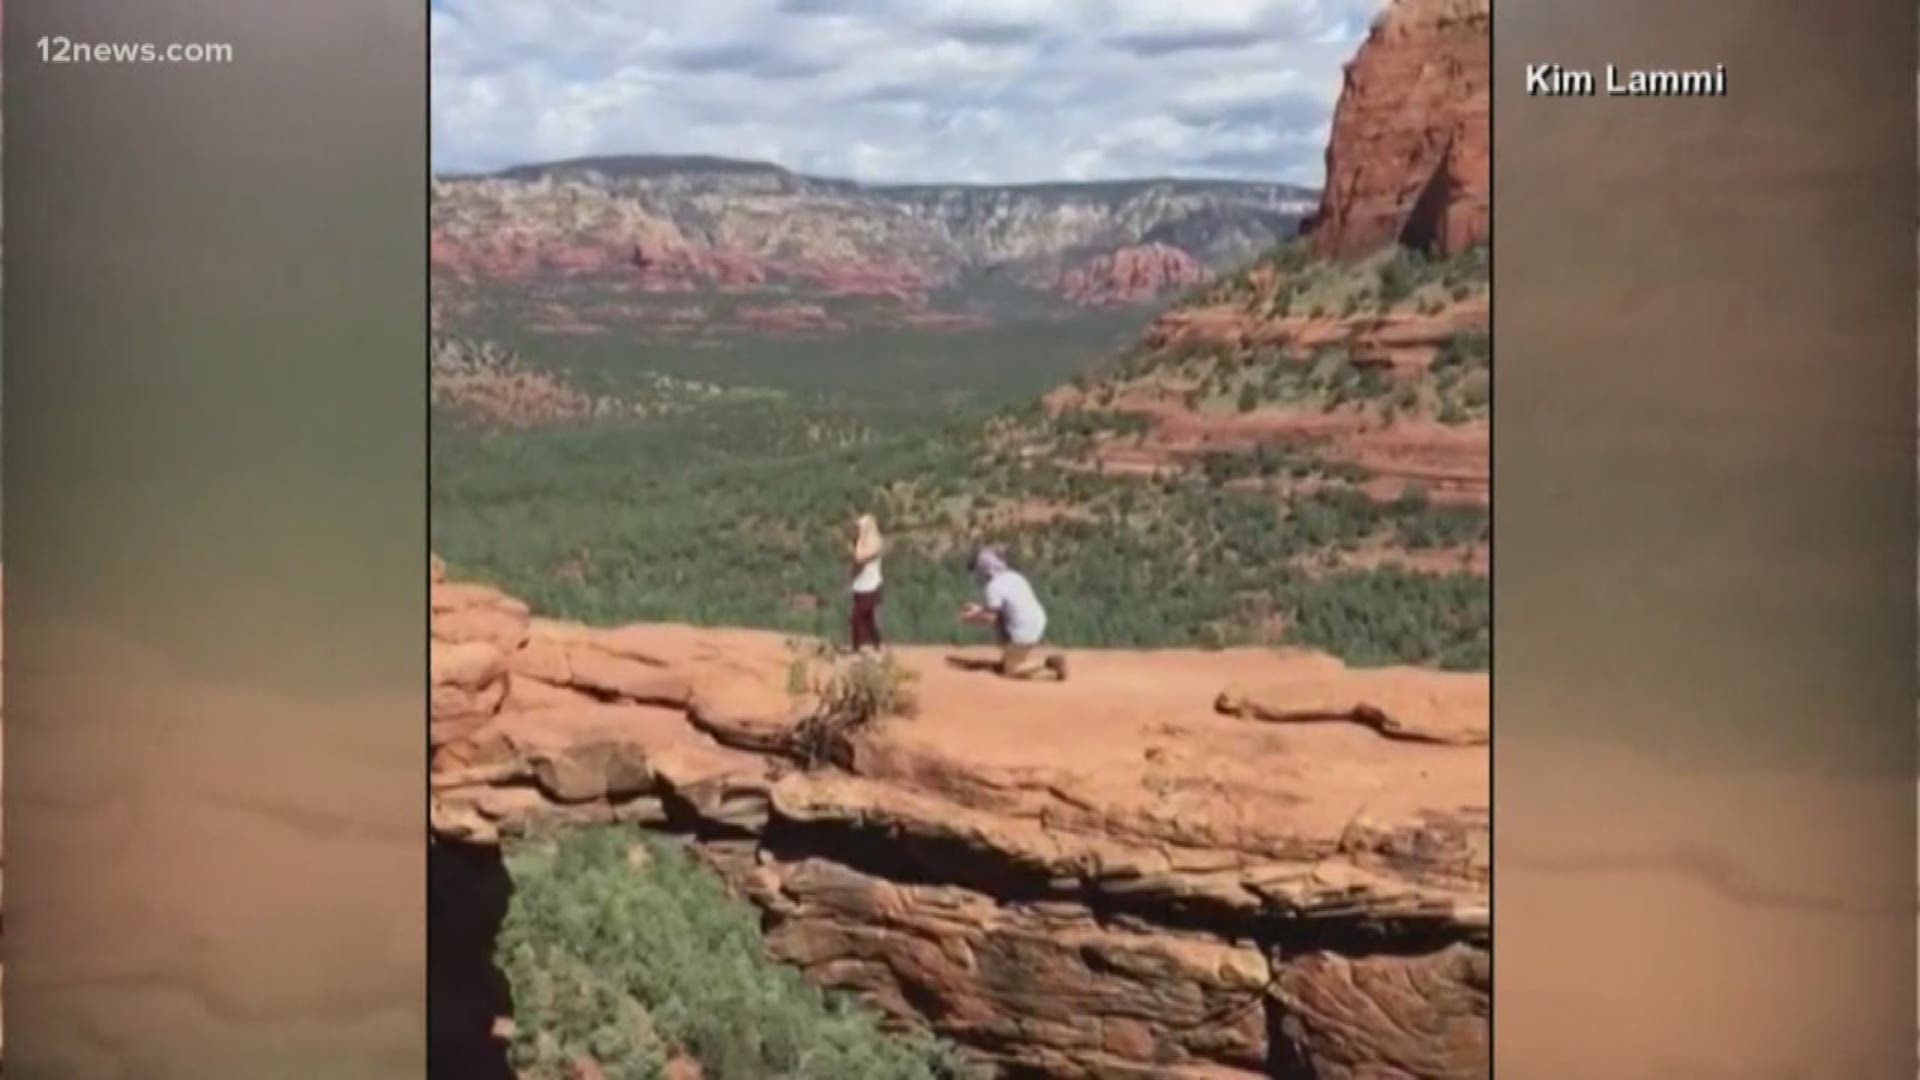 Kim Lammi was in Sedona when she just happened to record a man proposing to his girlfriend on Devil's Bridge. She doesn't know the couple, but wants to contact them to give them a copy of the video.